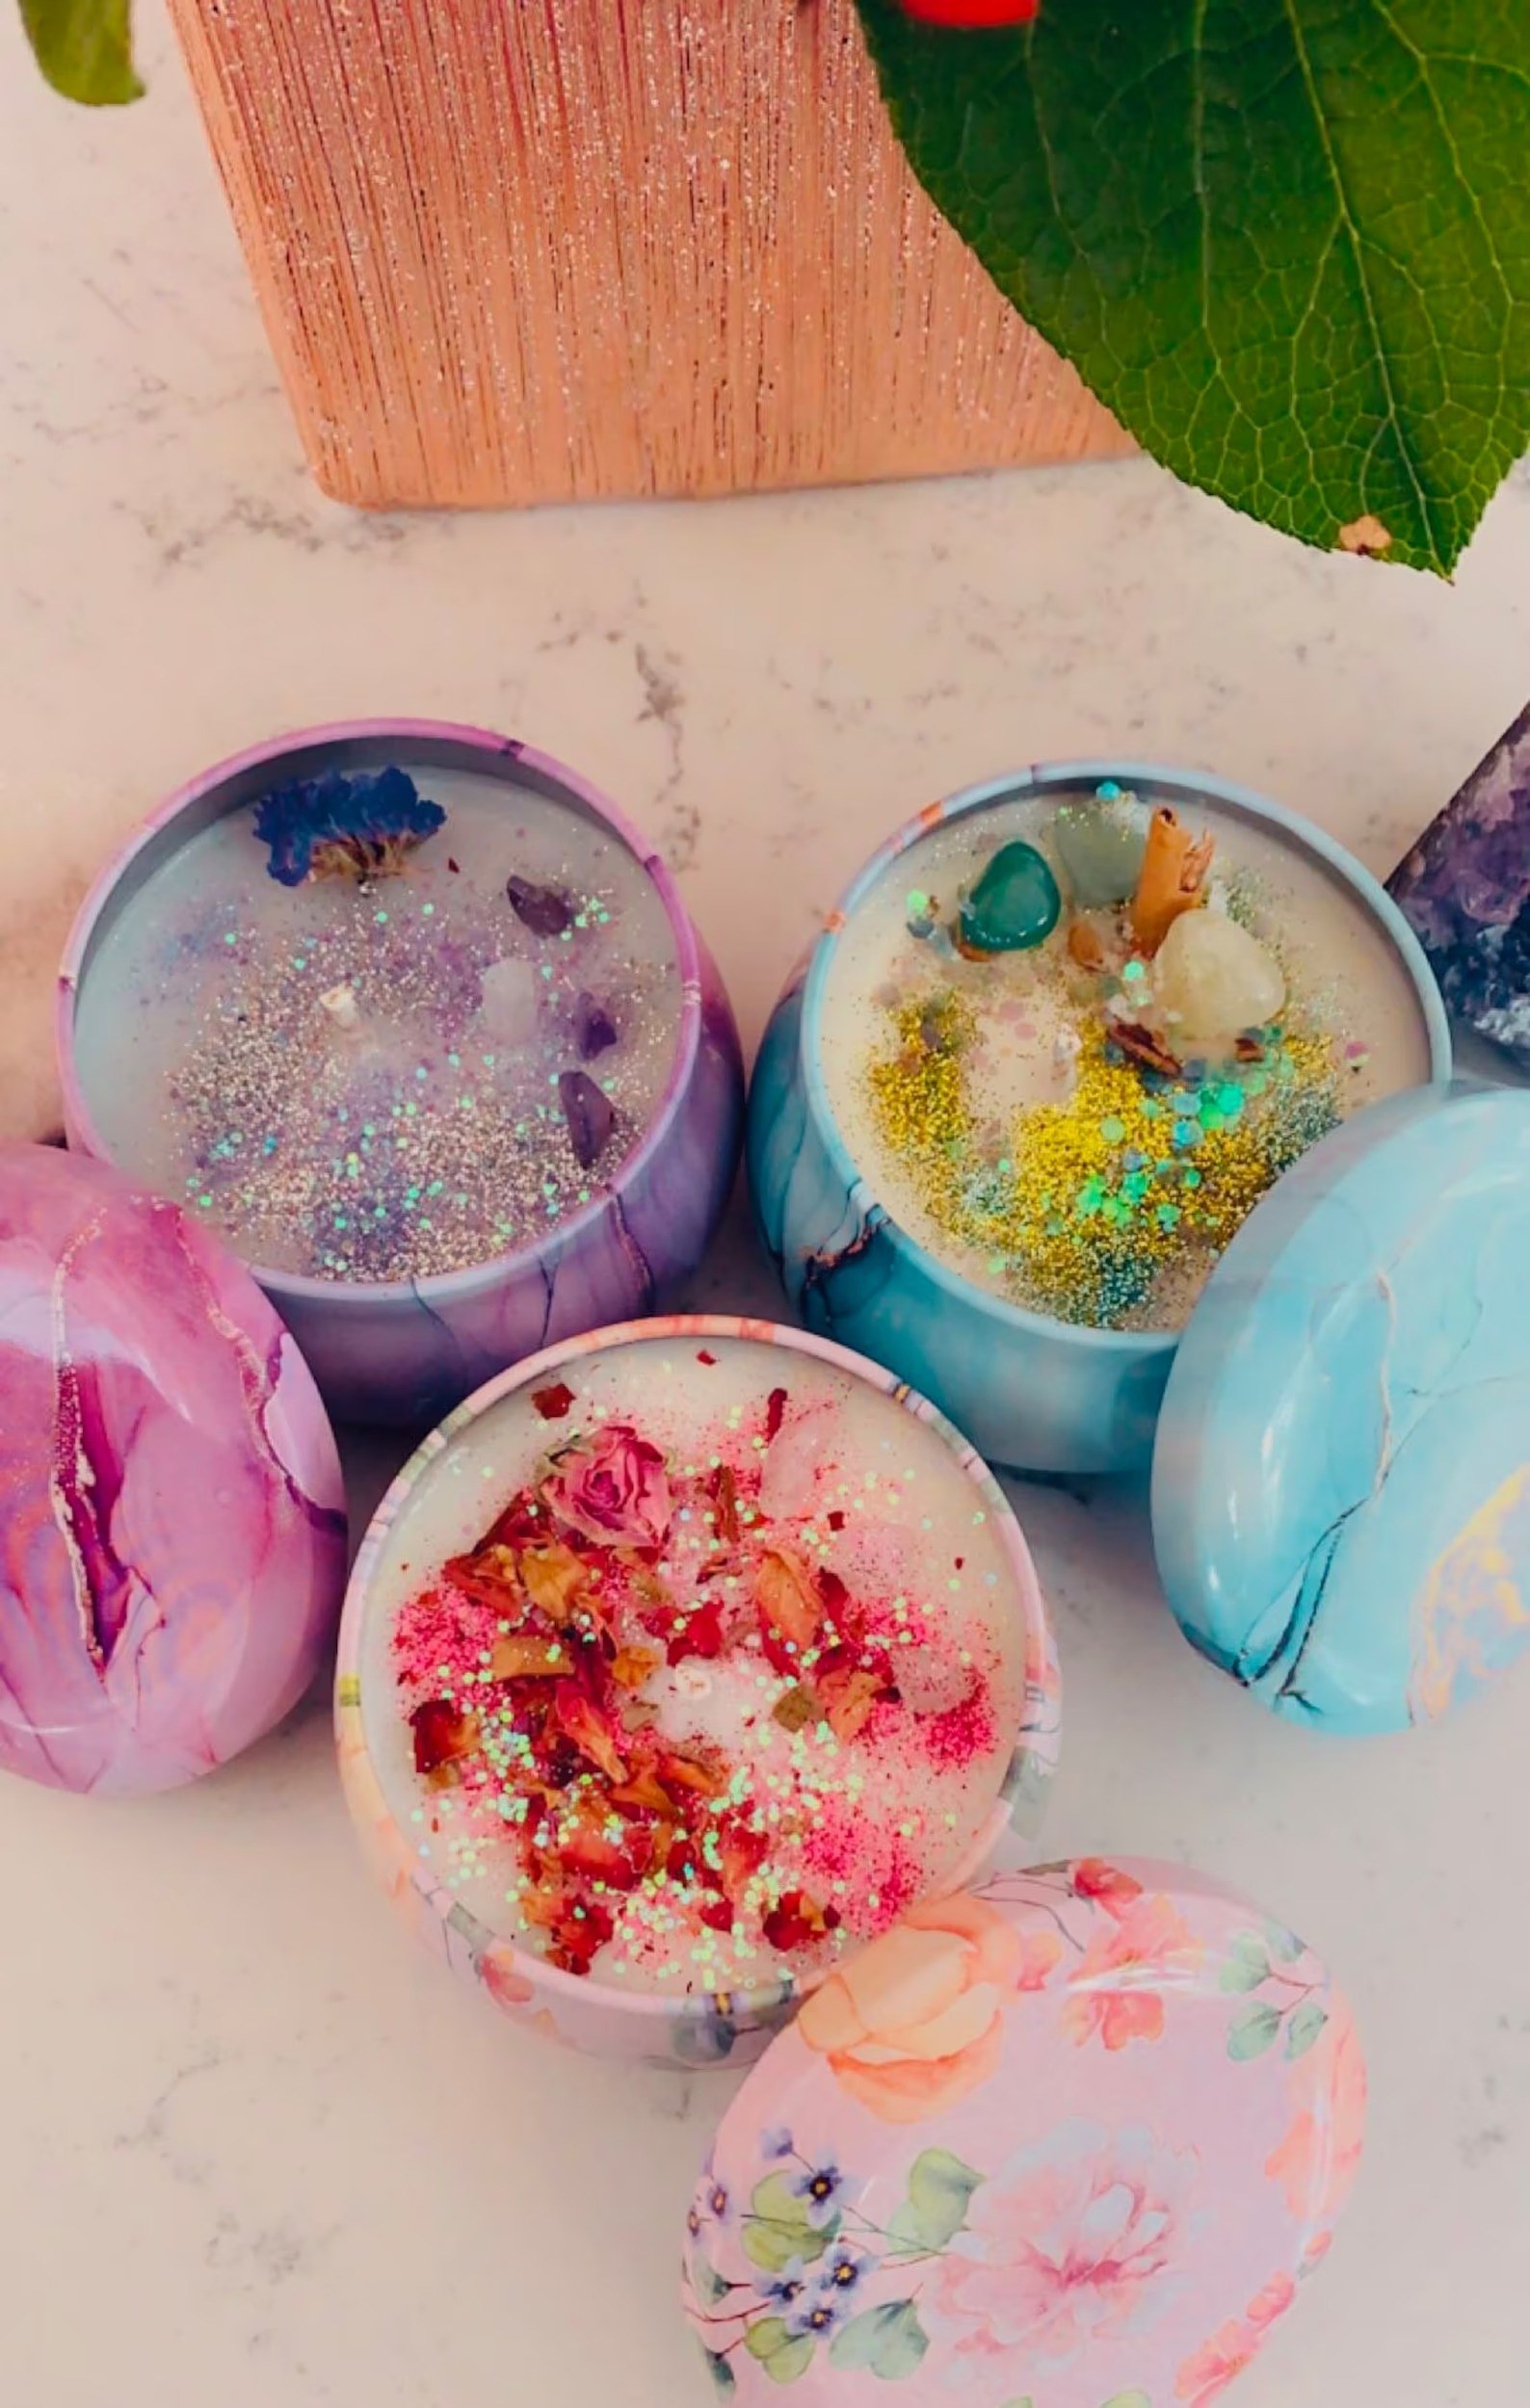 Colorful candles with crystals and glitter in them